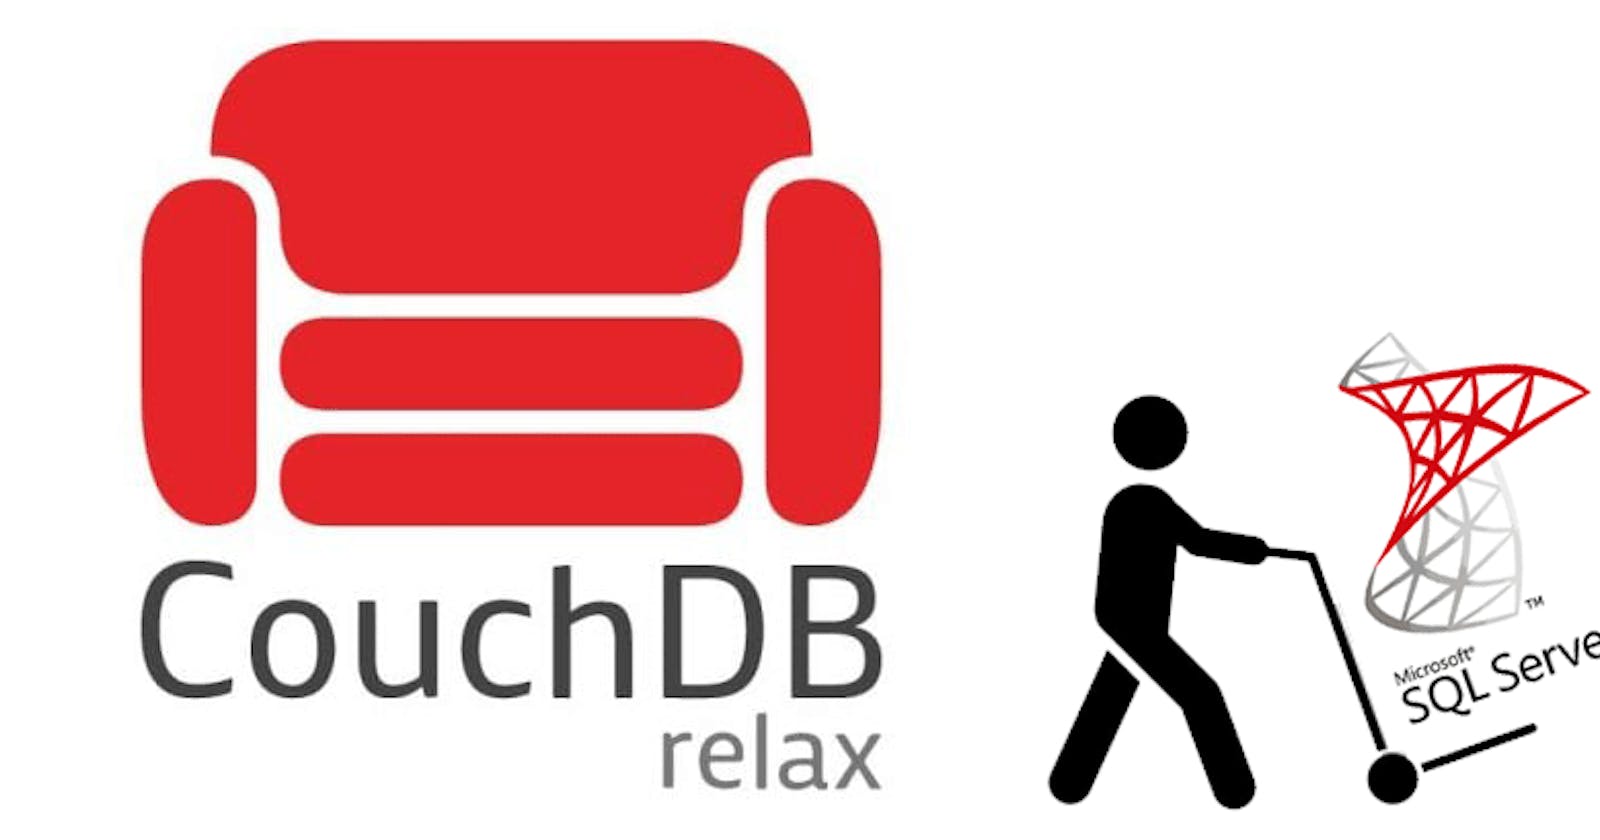 Why I am moving to CouchDB